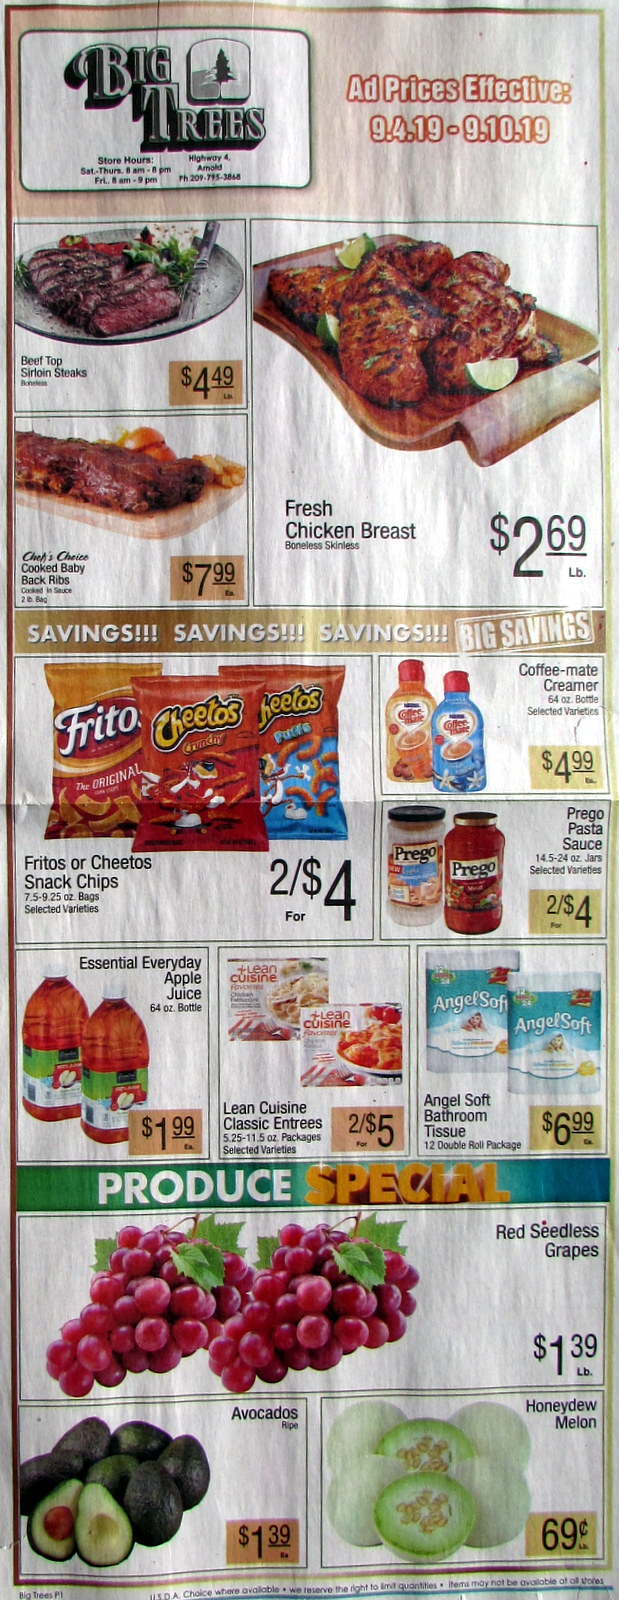 Big Trees Market Weekly Ad & Grocery Specials Through September 10th